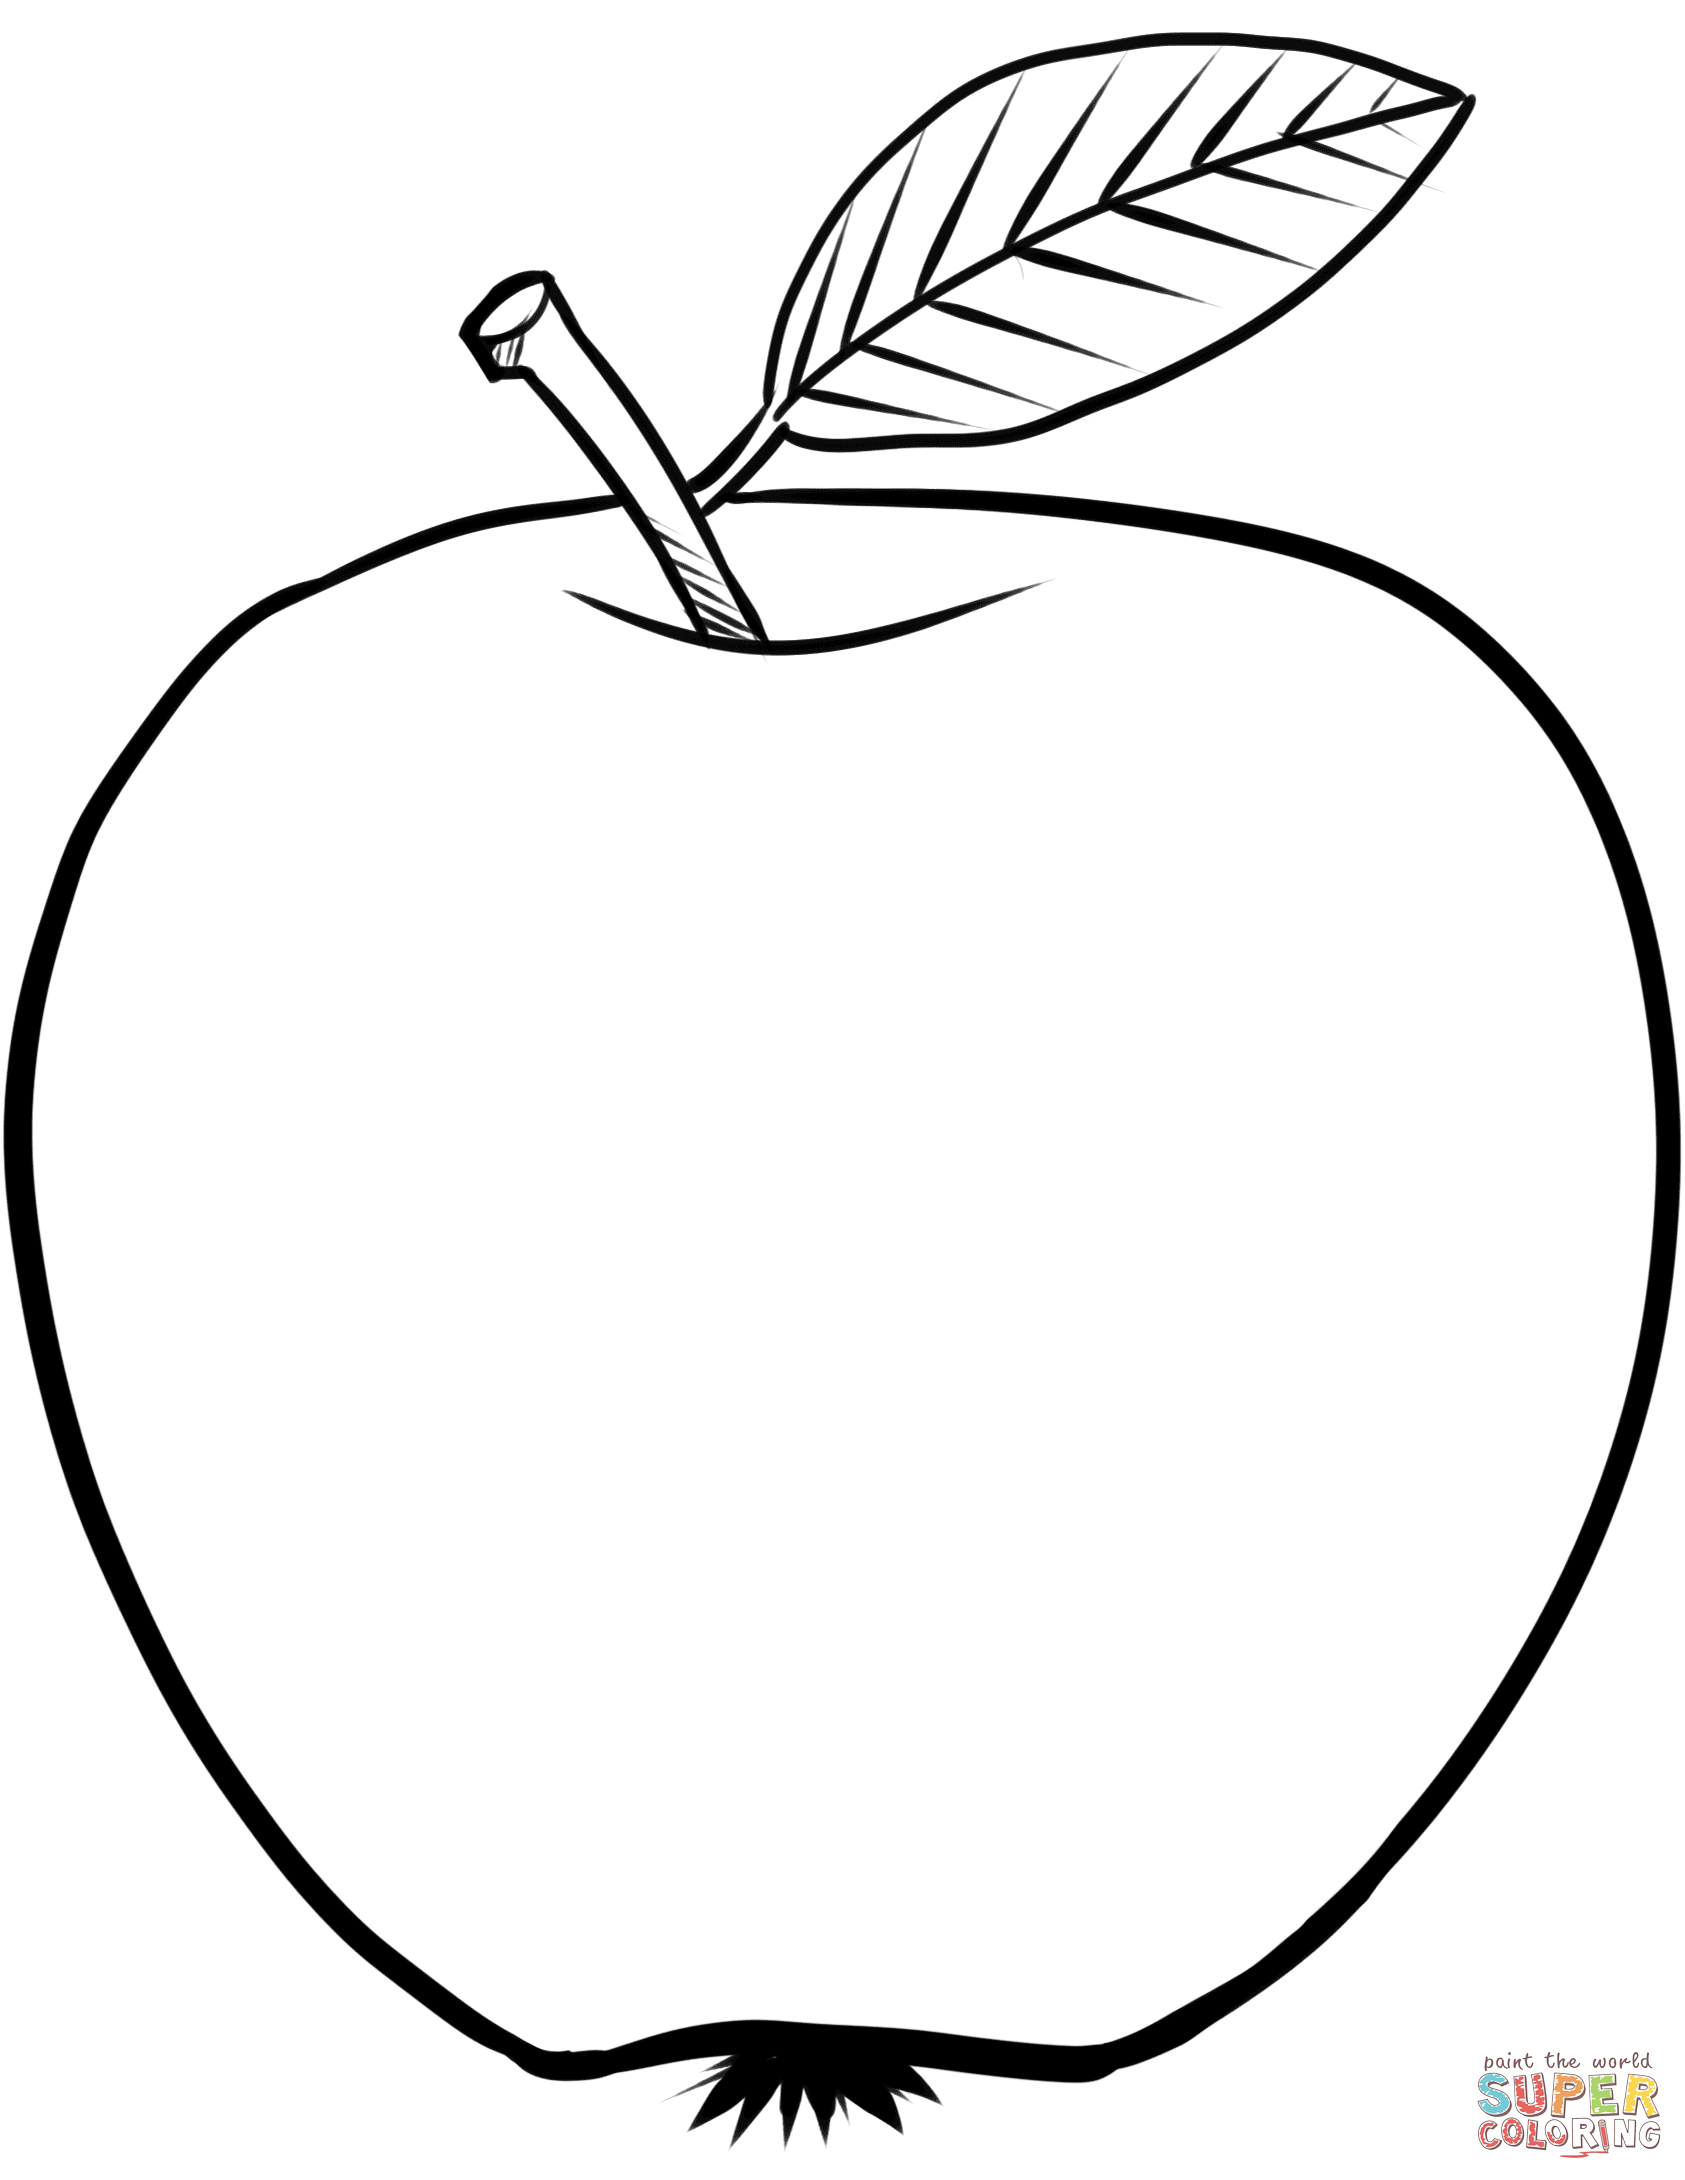 Apples coloring pages | Free Coloring Pages